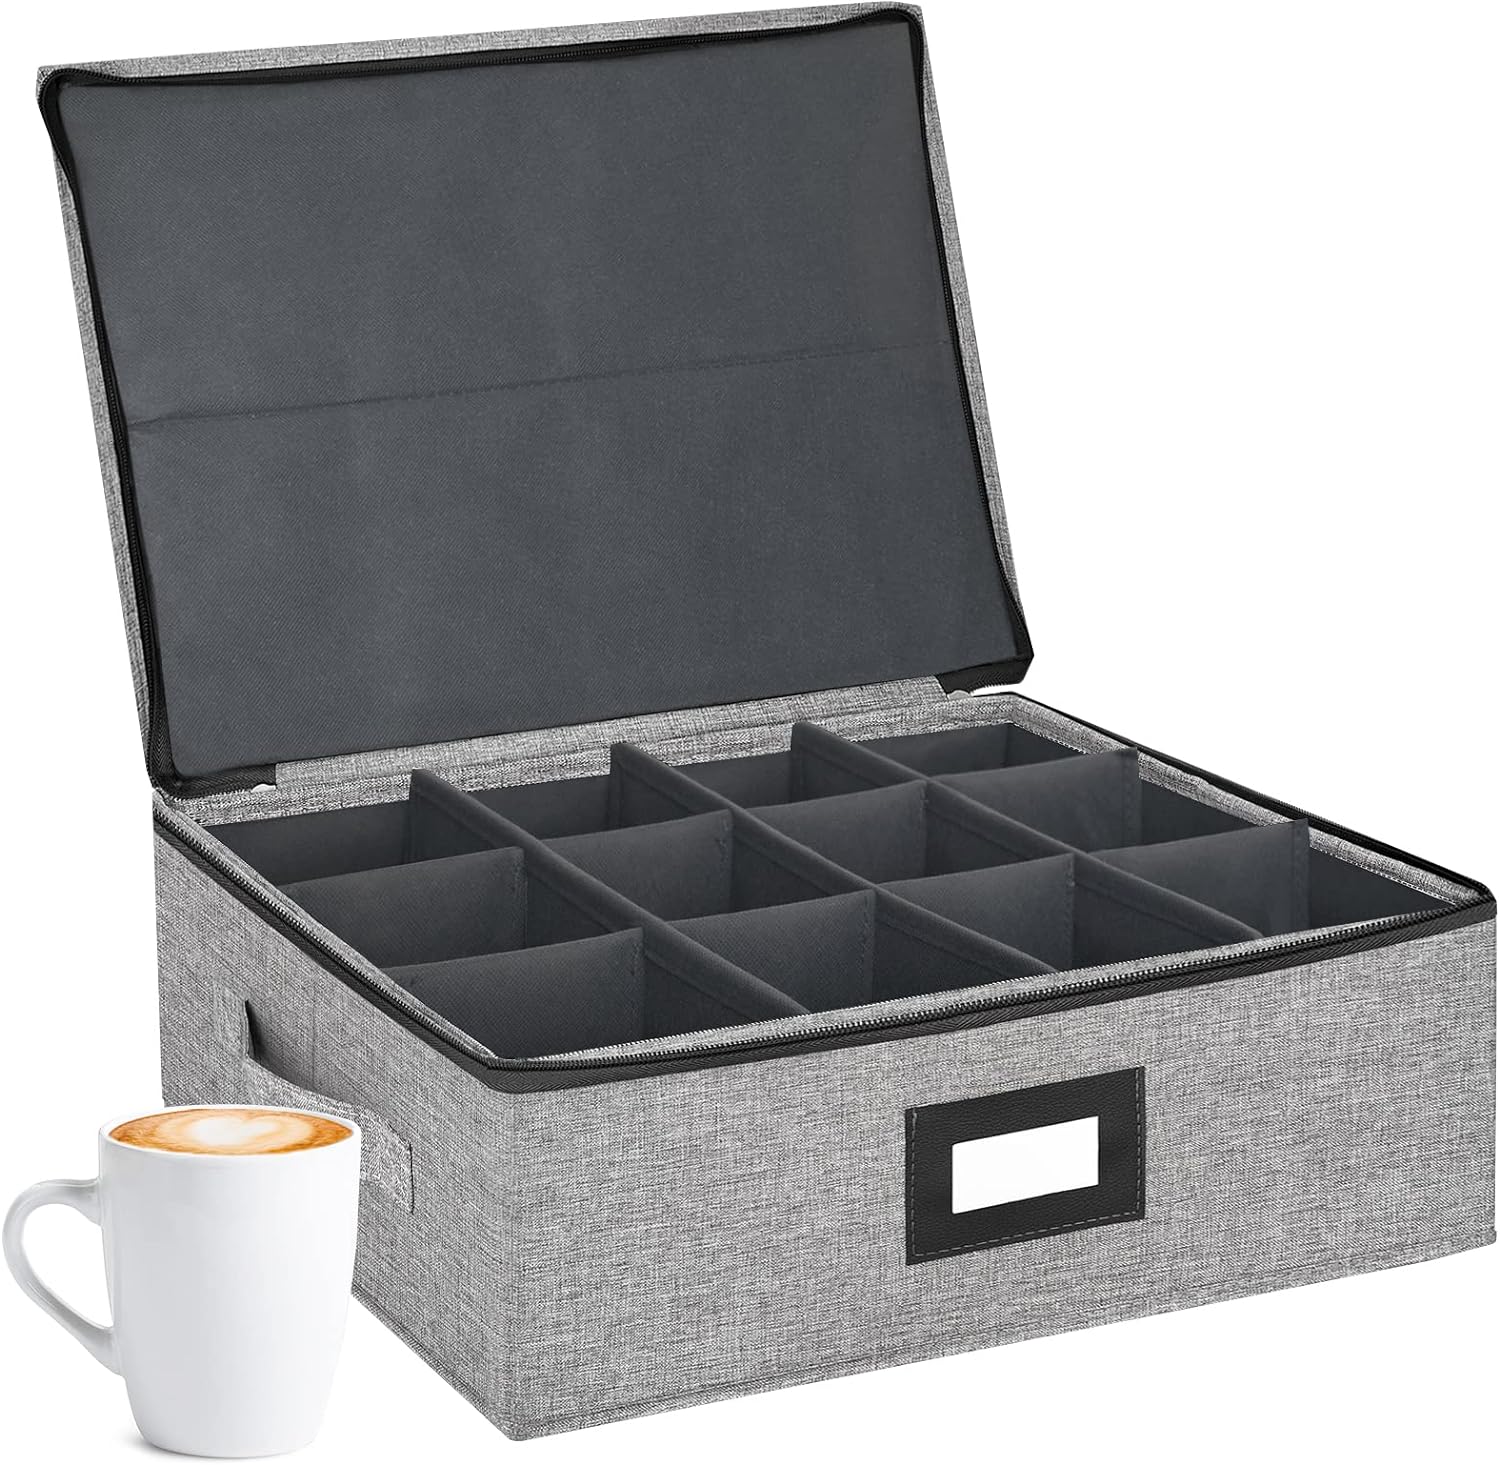 VERONLY Mug Storage Box with Dividers, China Storage Containers Hard Shell Coffee Mug Storage Case Chest with Zipper Lid and Handles, Stackable for 12 Coffee Mugs, Tea Cups, Moving & Packing (Gray)